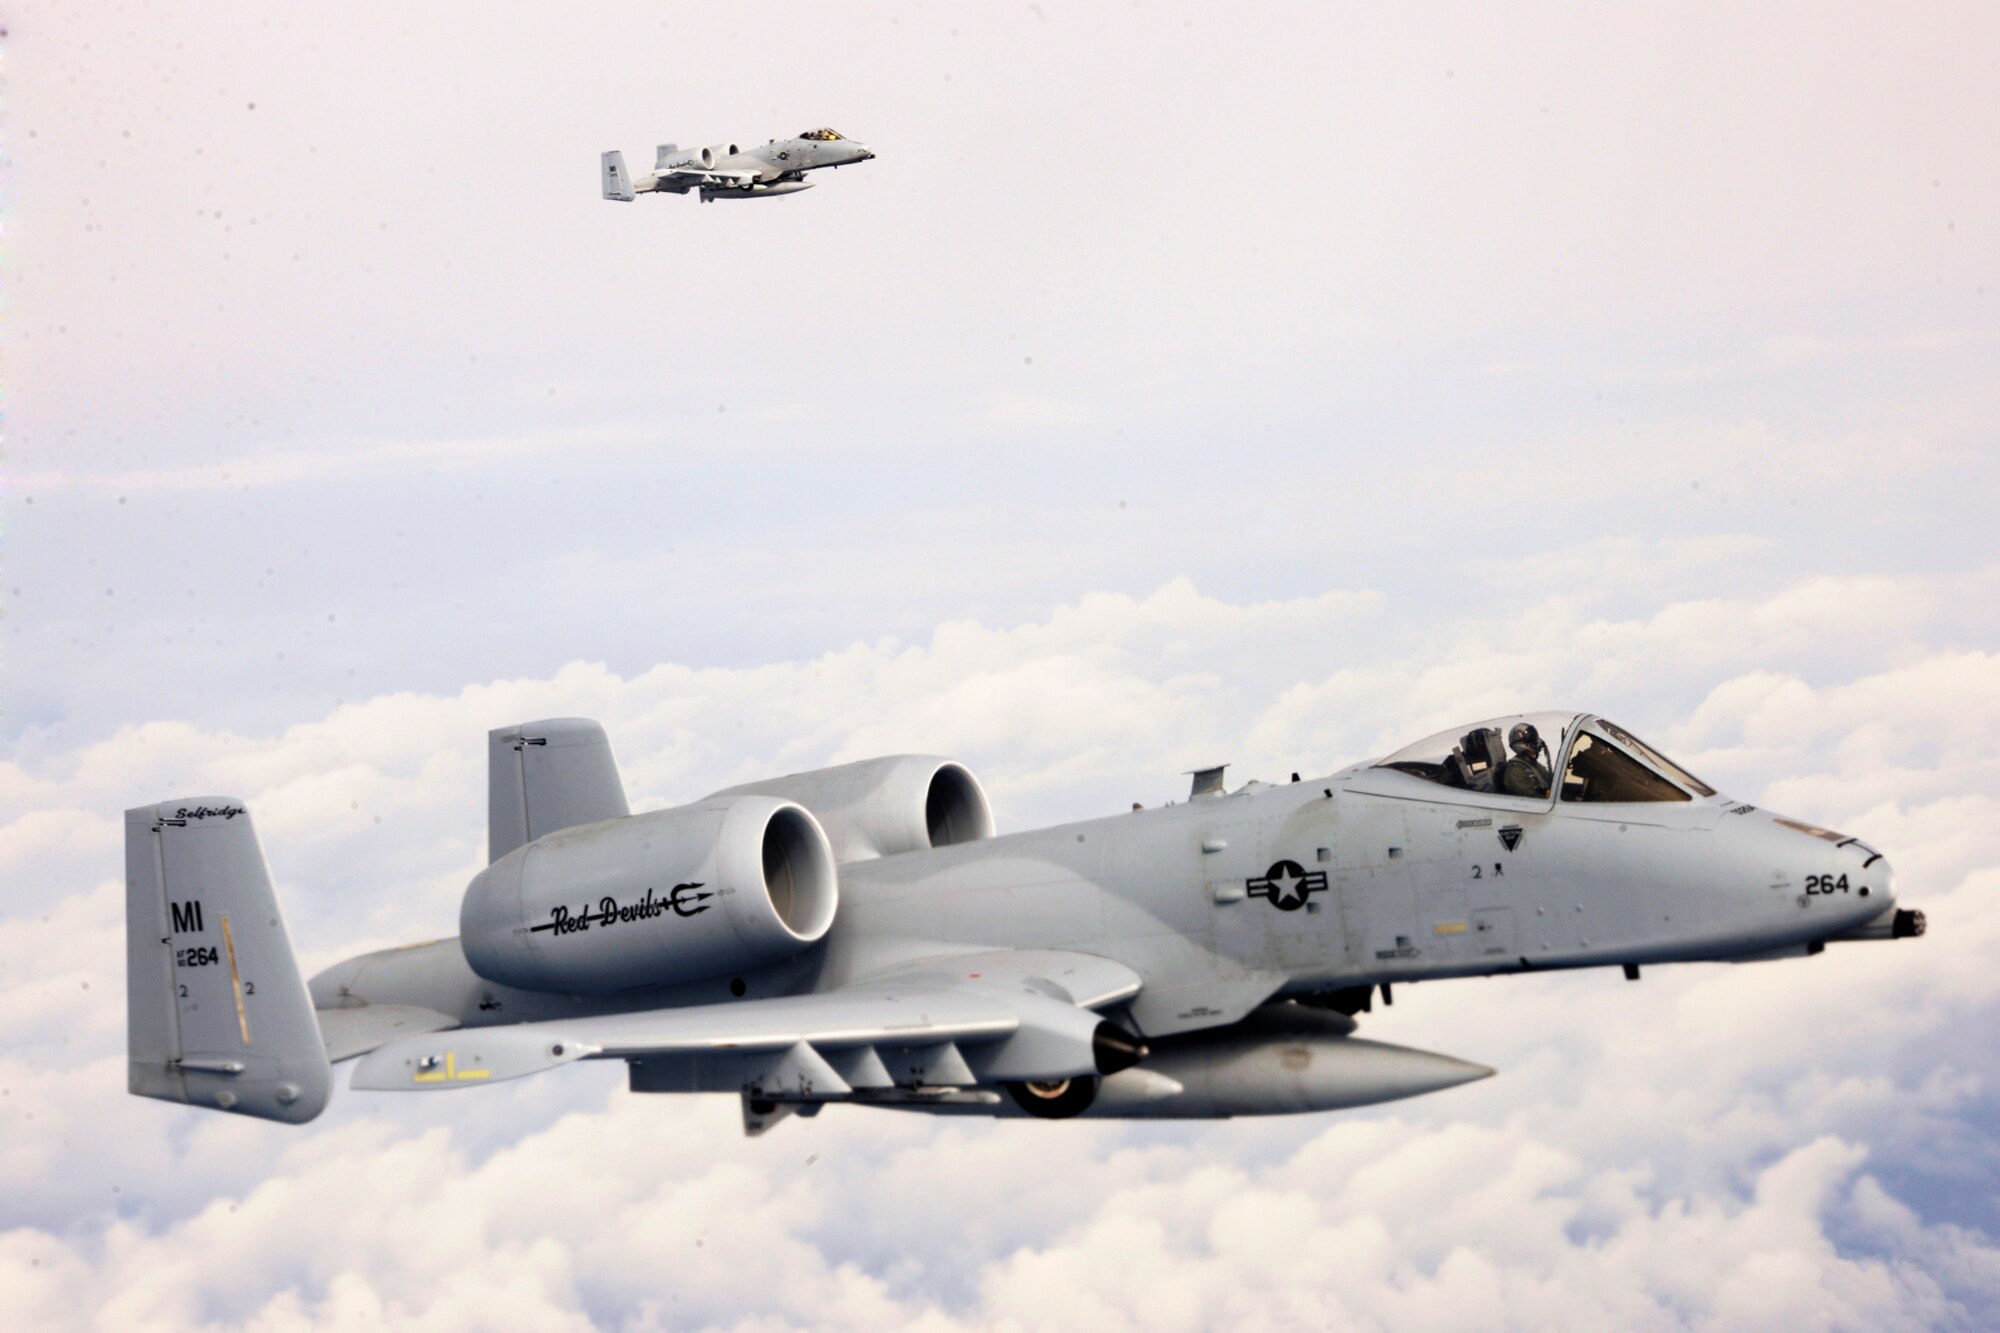 150411-Z-EZ686-983 -- Two A-10 Thunderbolt II’s of the 107th Fighter Squadron from Selfridge Air National Guard Base Mich., fly toward Southwest Asia in a deployment of some 350 Michigan Air National Guard Airmen from the base. The Michigan Airmen will be supporting U.S. Central Command operations in the region. (U.S. Air National Guard photo by MSgt. David Kujawa/Released)